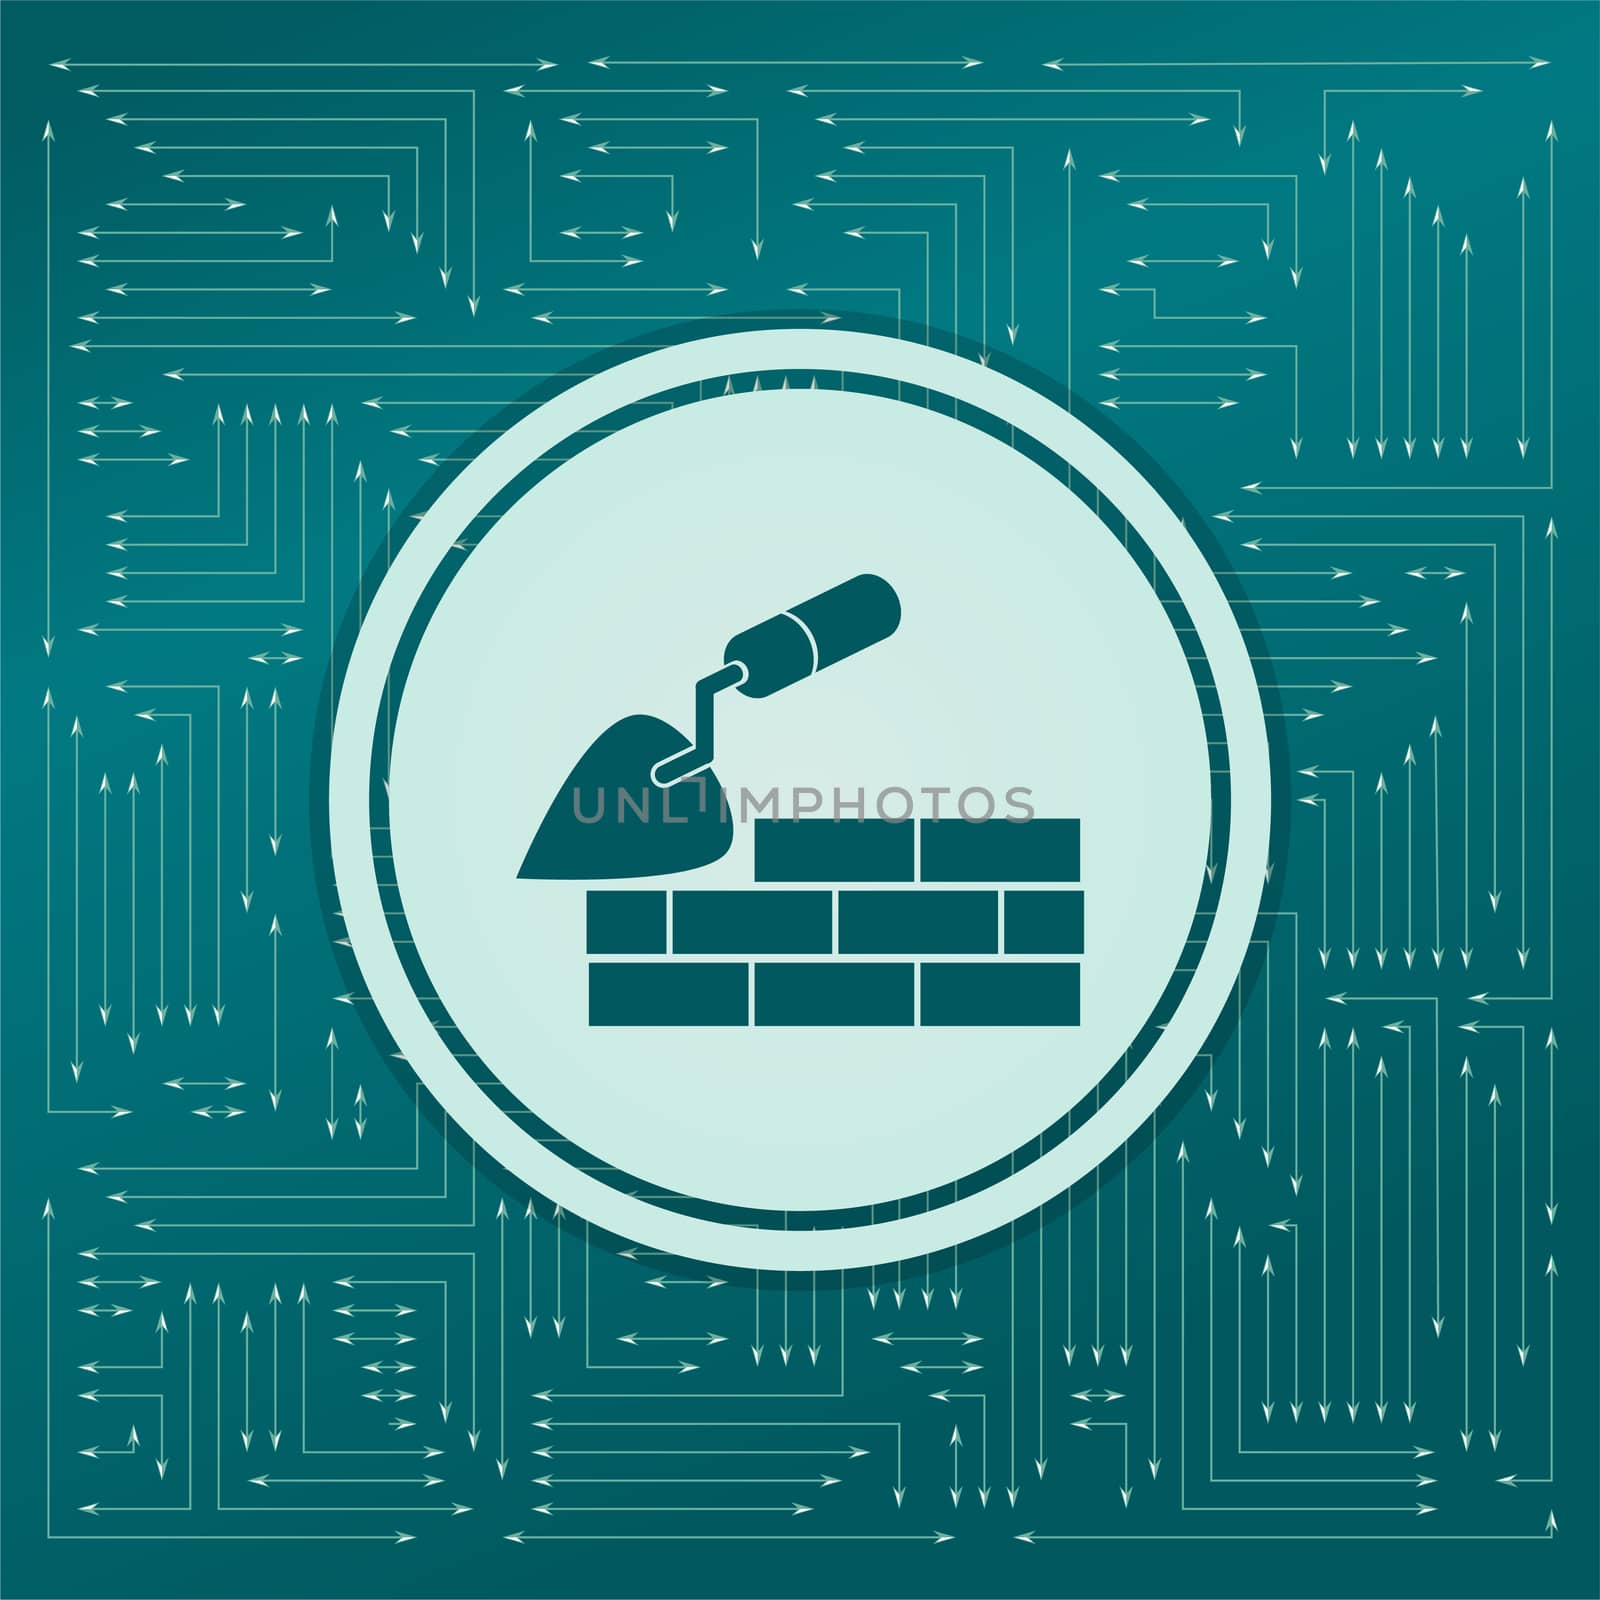 Trowel building and brick wall icon on a green background, with arrows in different directions. It appears on the electronic board. illustration